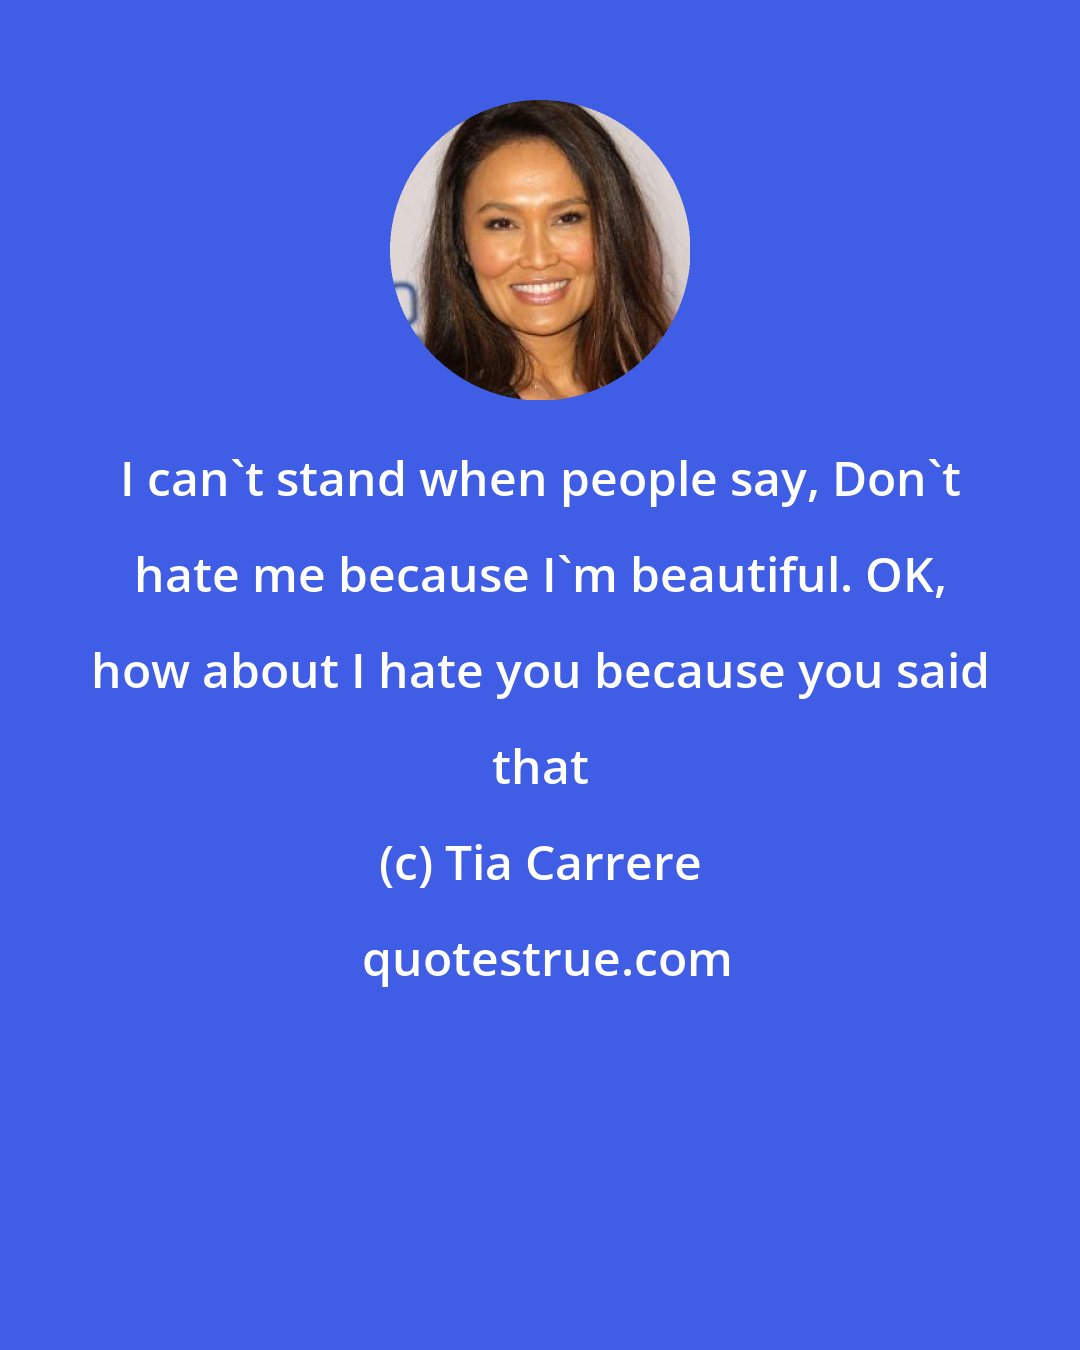 Tia Carrere: I can't stand when people say, Don't hate me because I'm beautiful. OK, how about I hate you because you said that